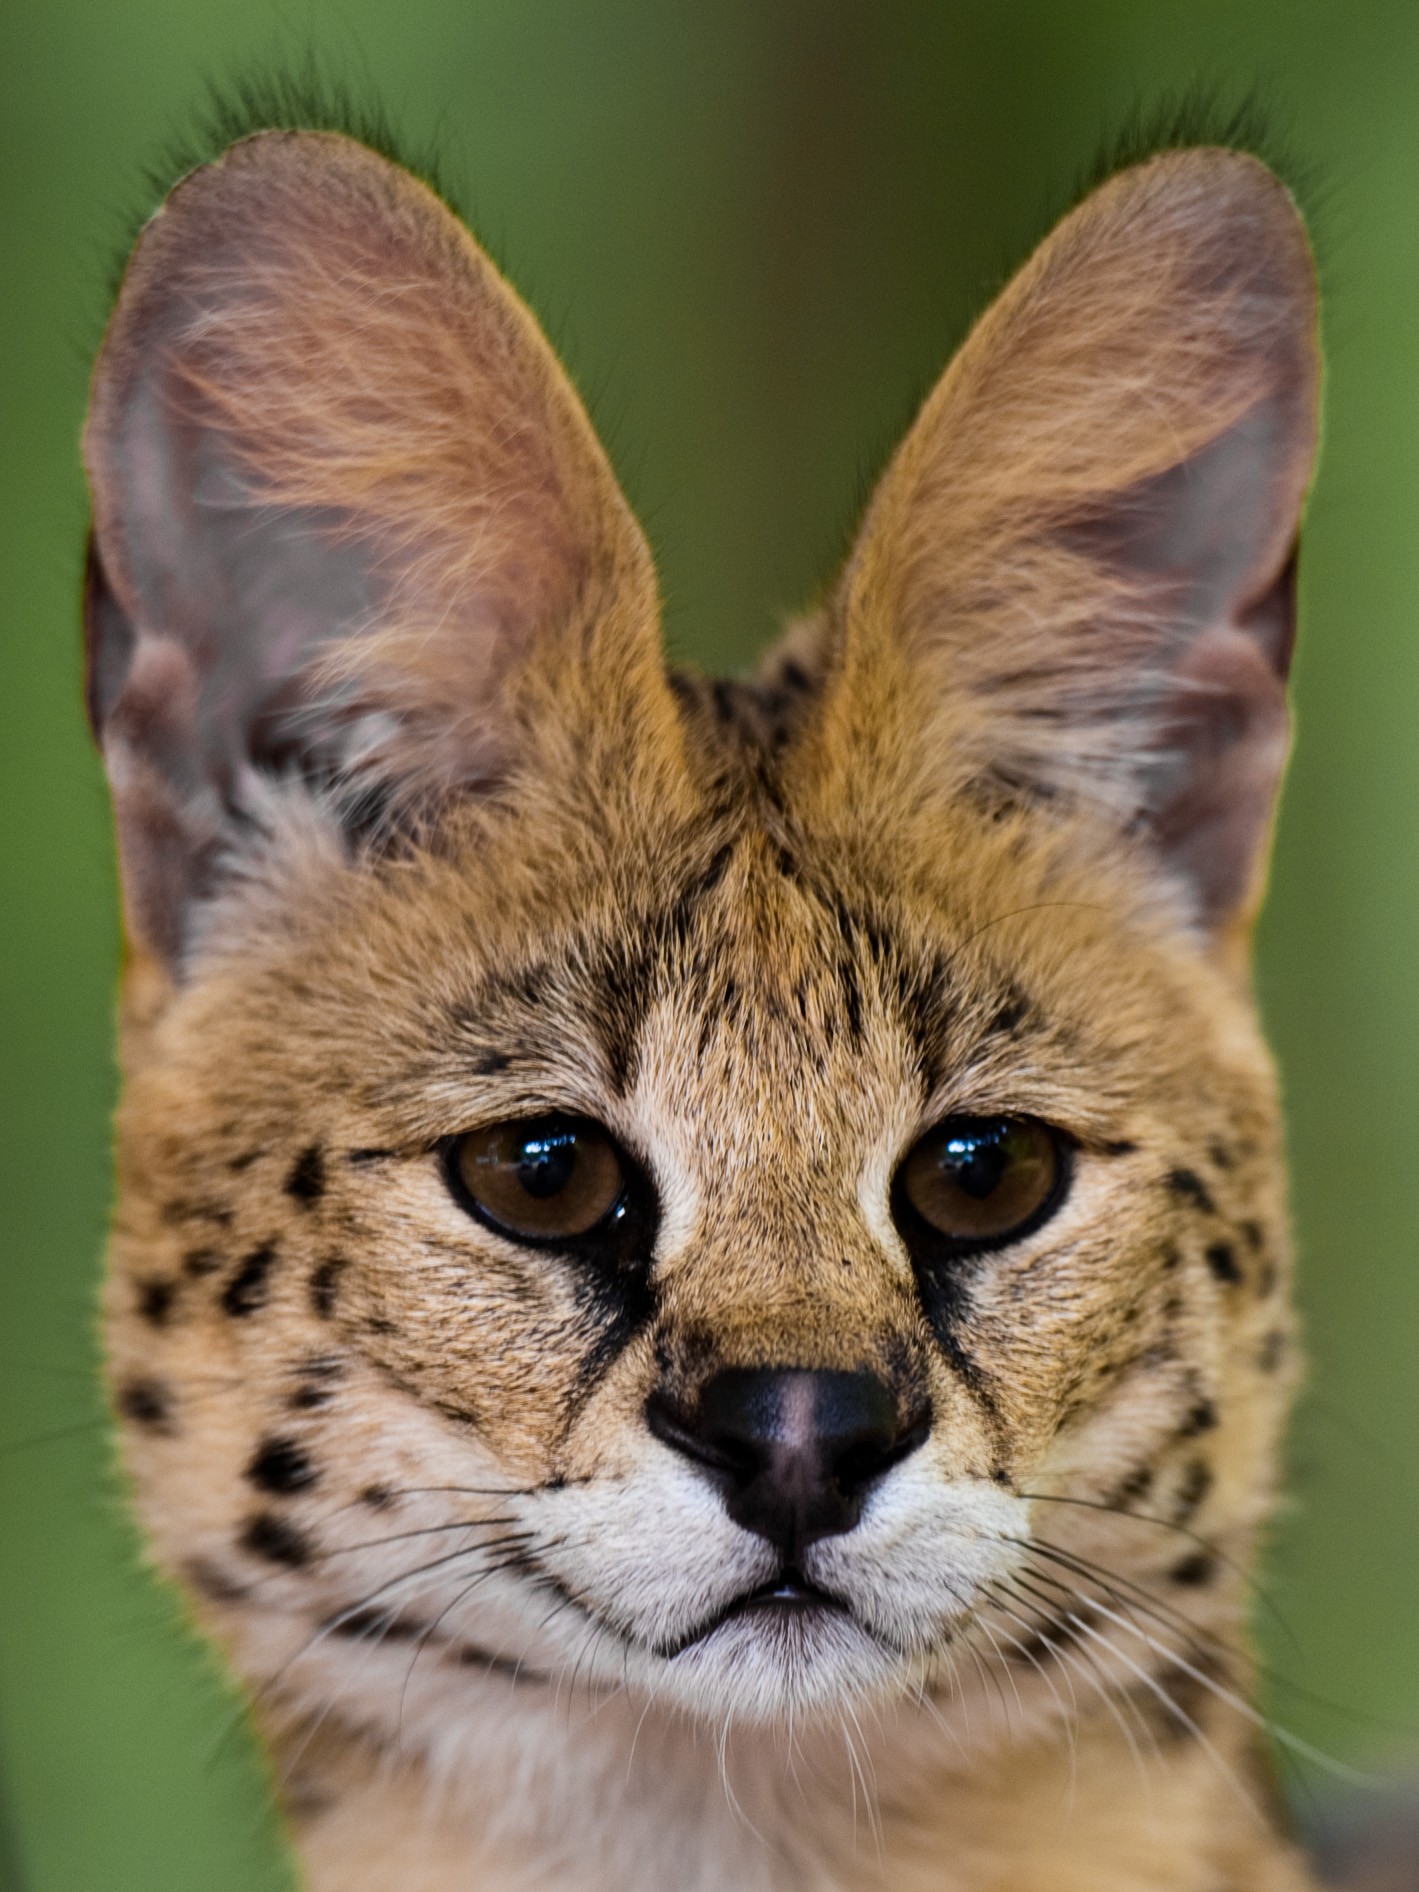 21 Things To Know Before Caring For An African Serval Cat – Tele-Talk